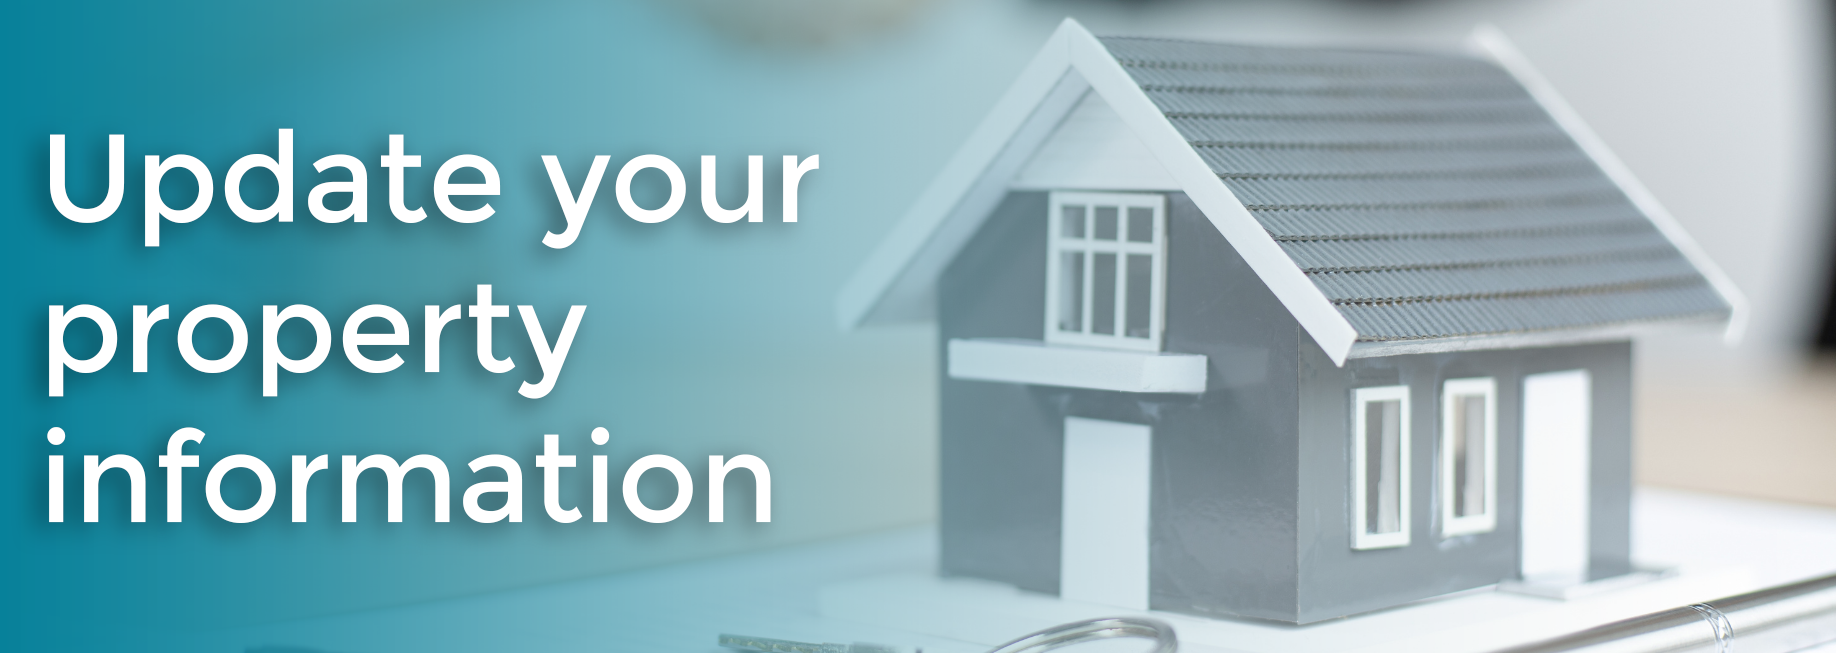 Update your property information